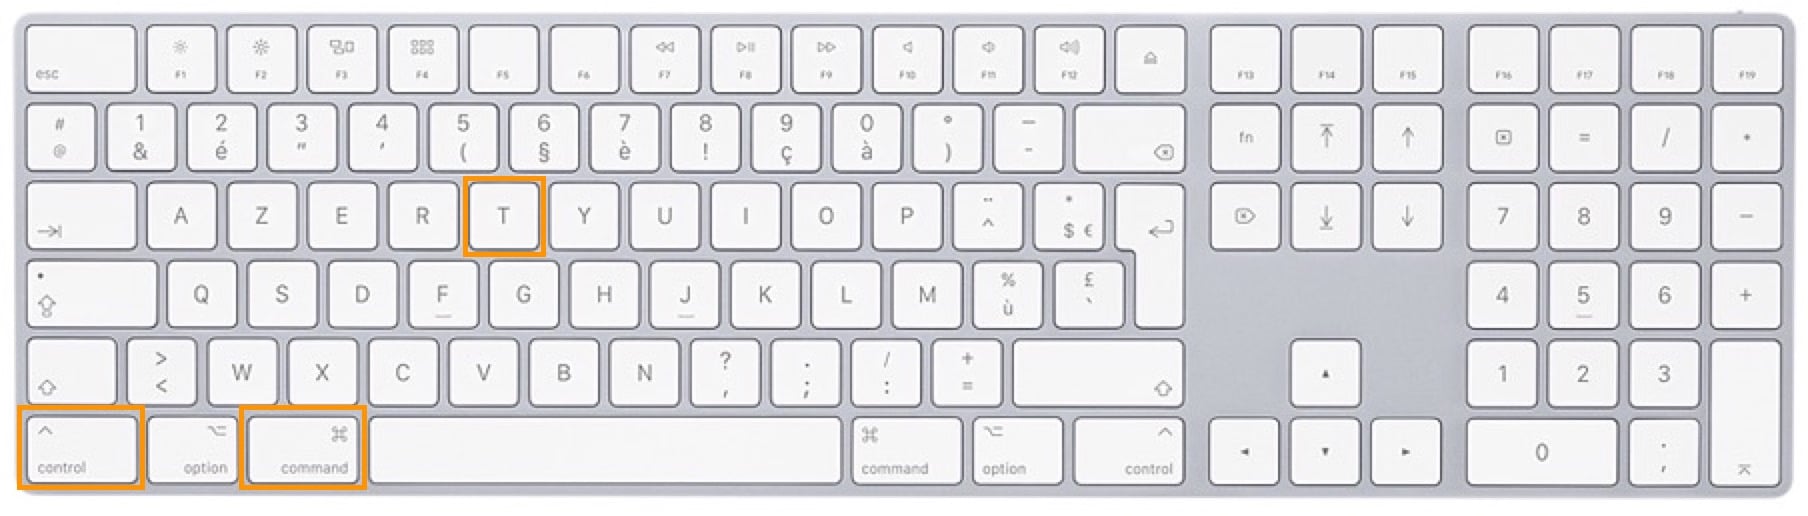 12 keyboard shortcuts you need to know for the Preview app on macOS